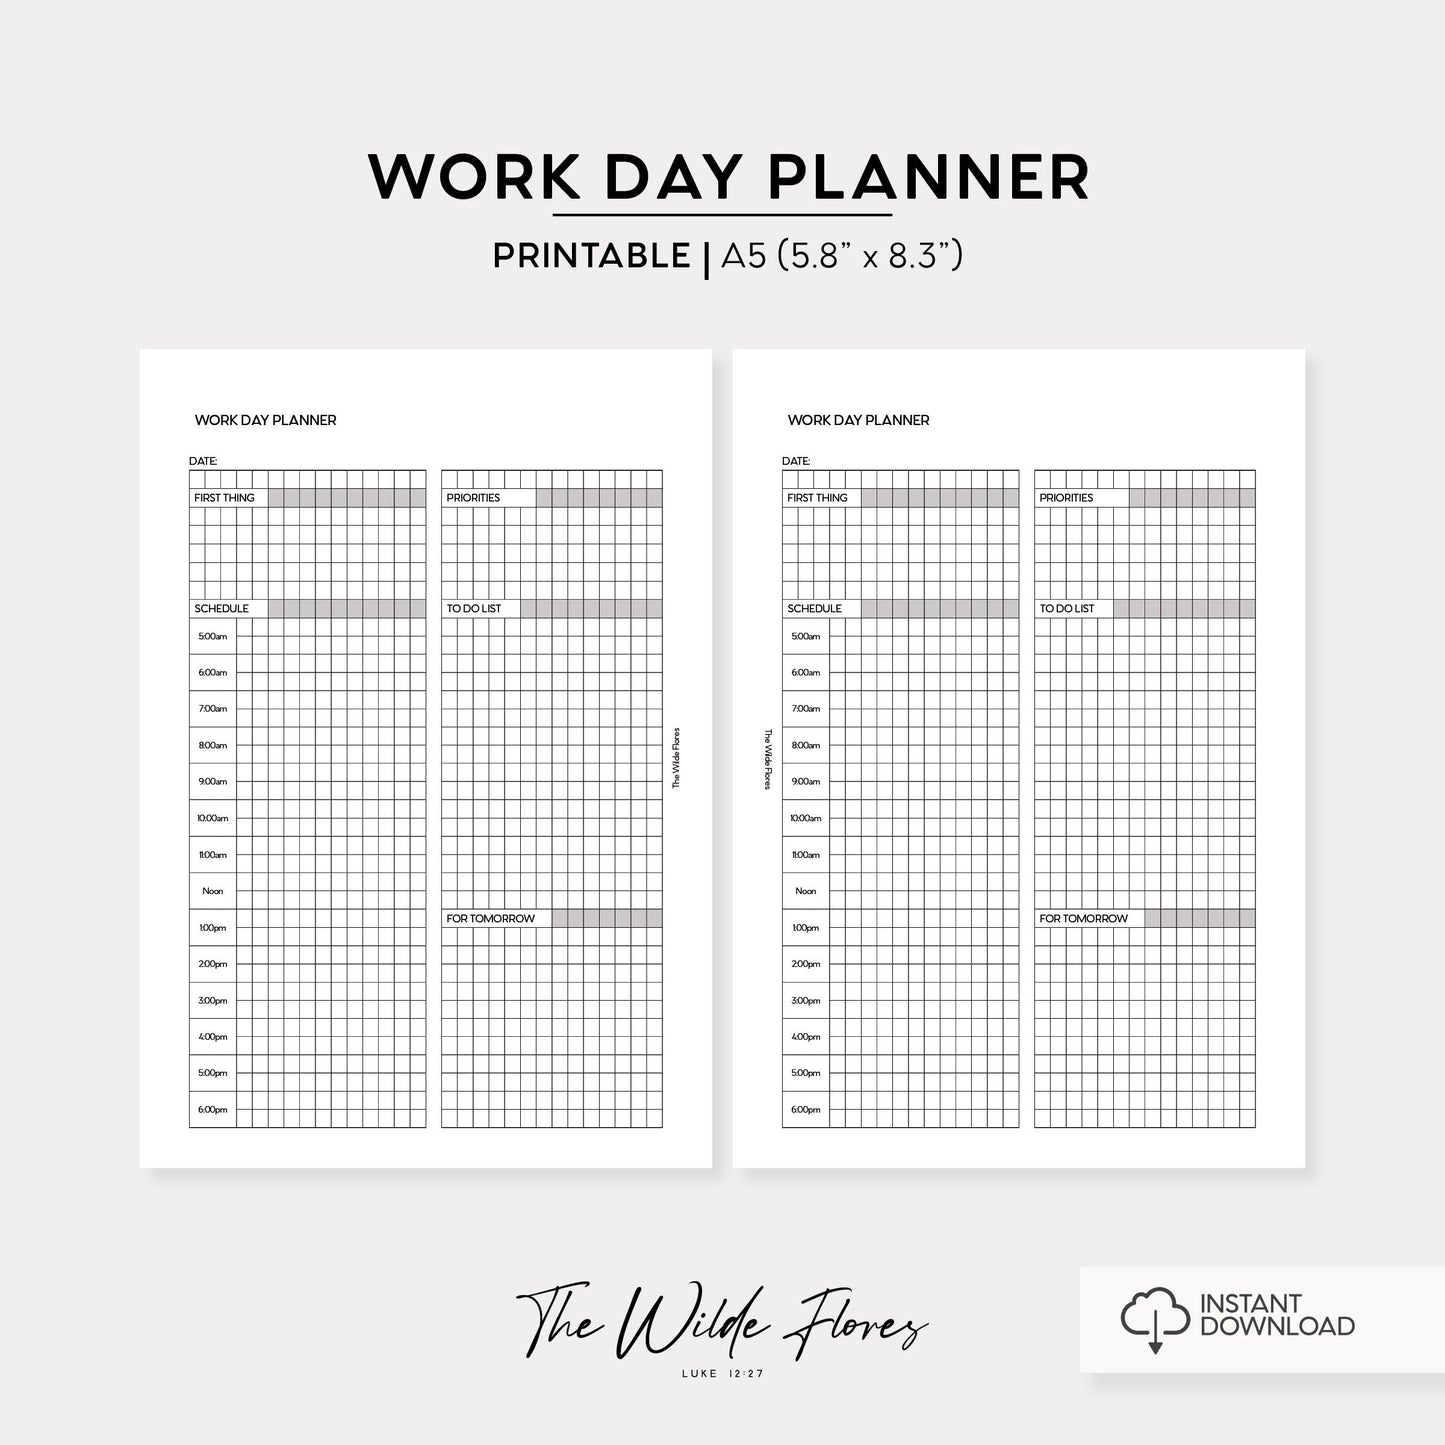 Work Day Planner: A5 Size Printable